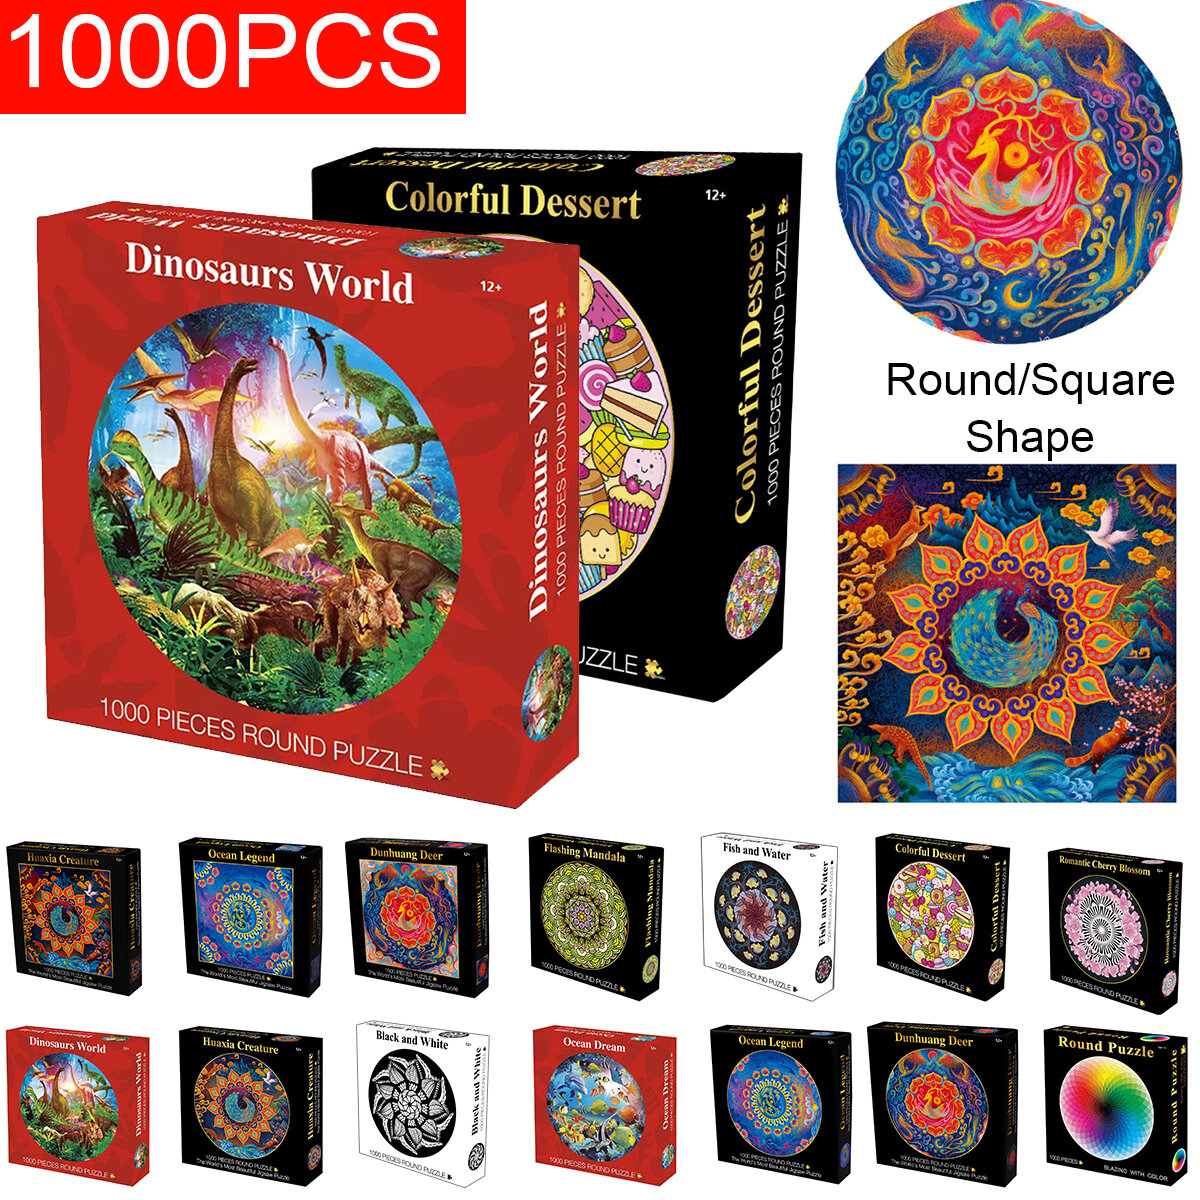 1000 Pieces Thousands Of Colors Rainbow Coil Series Children's Gift Jigsaw Puzzle Toy Educational To